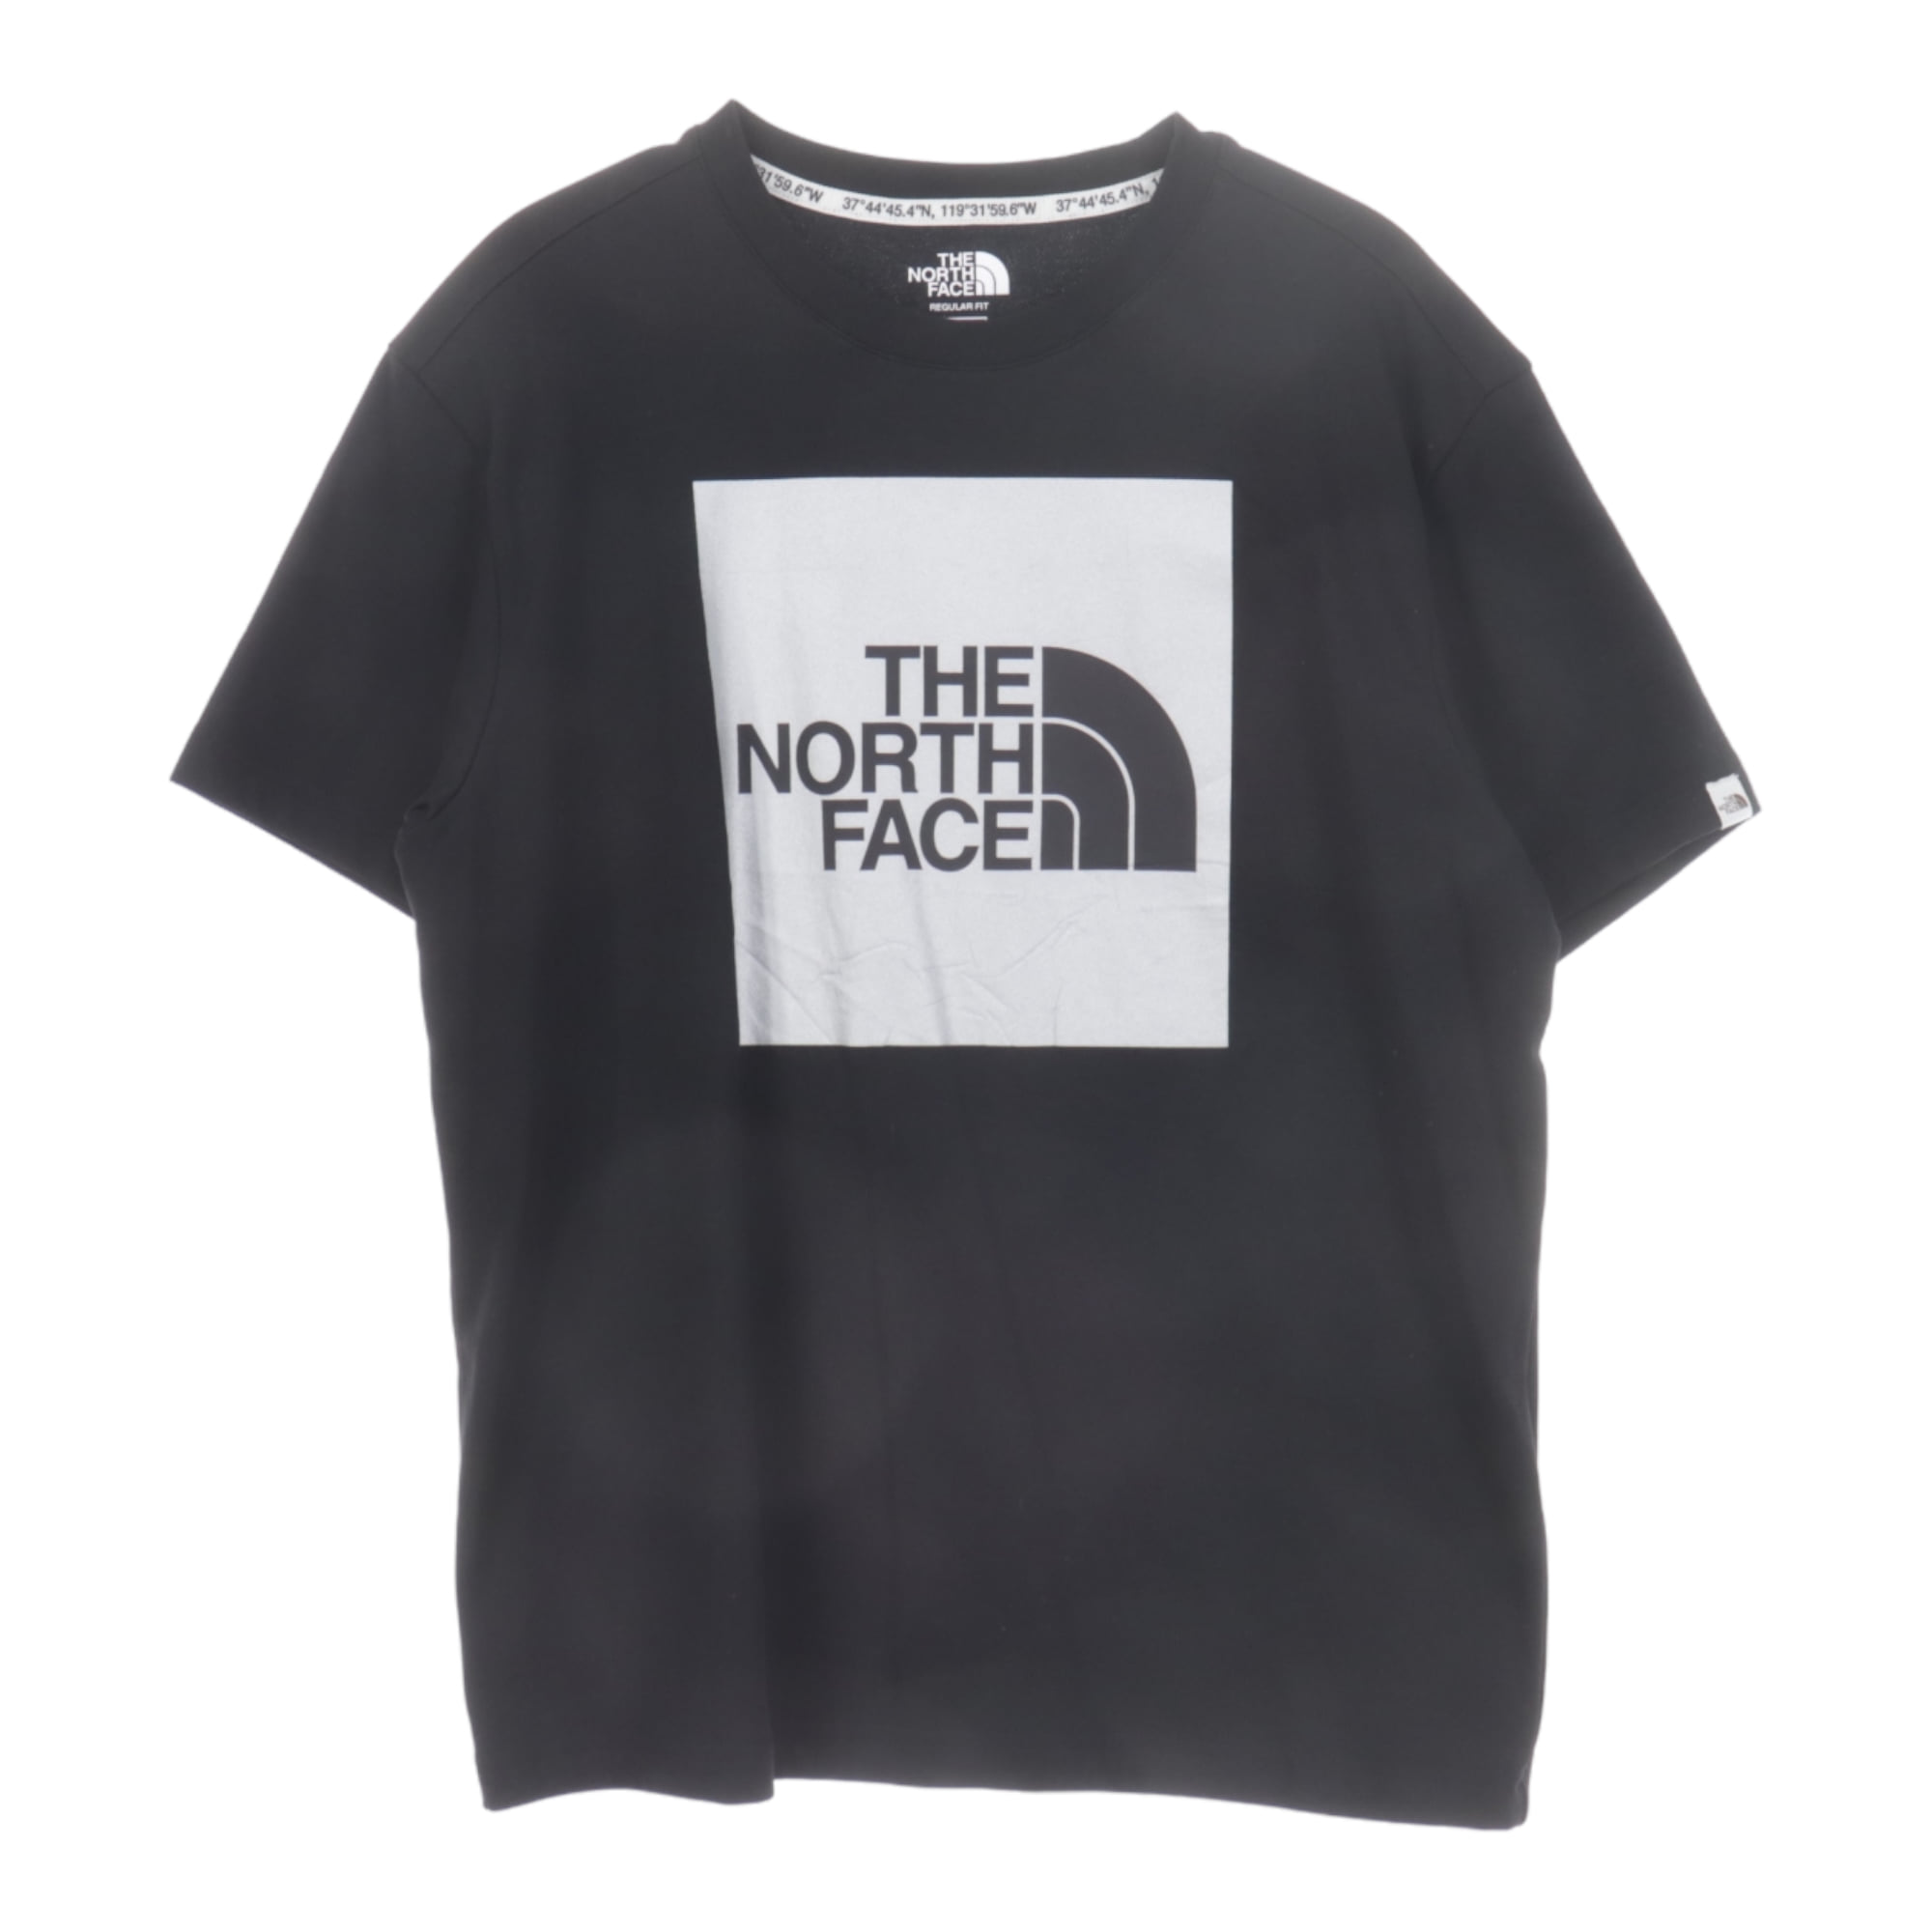 The North Face,T-Shirts